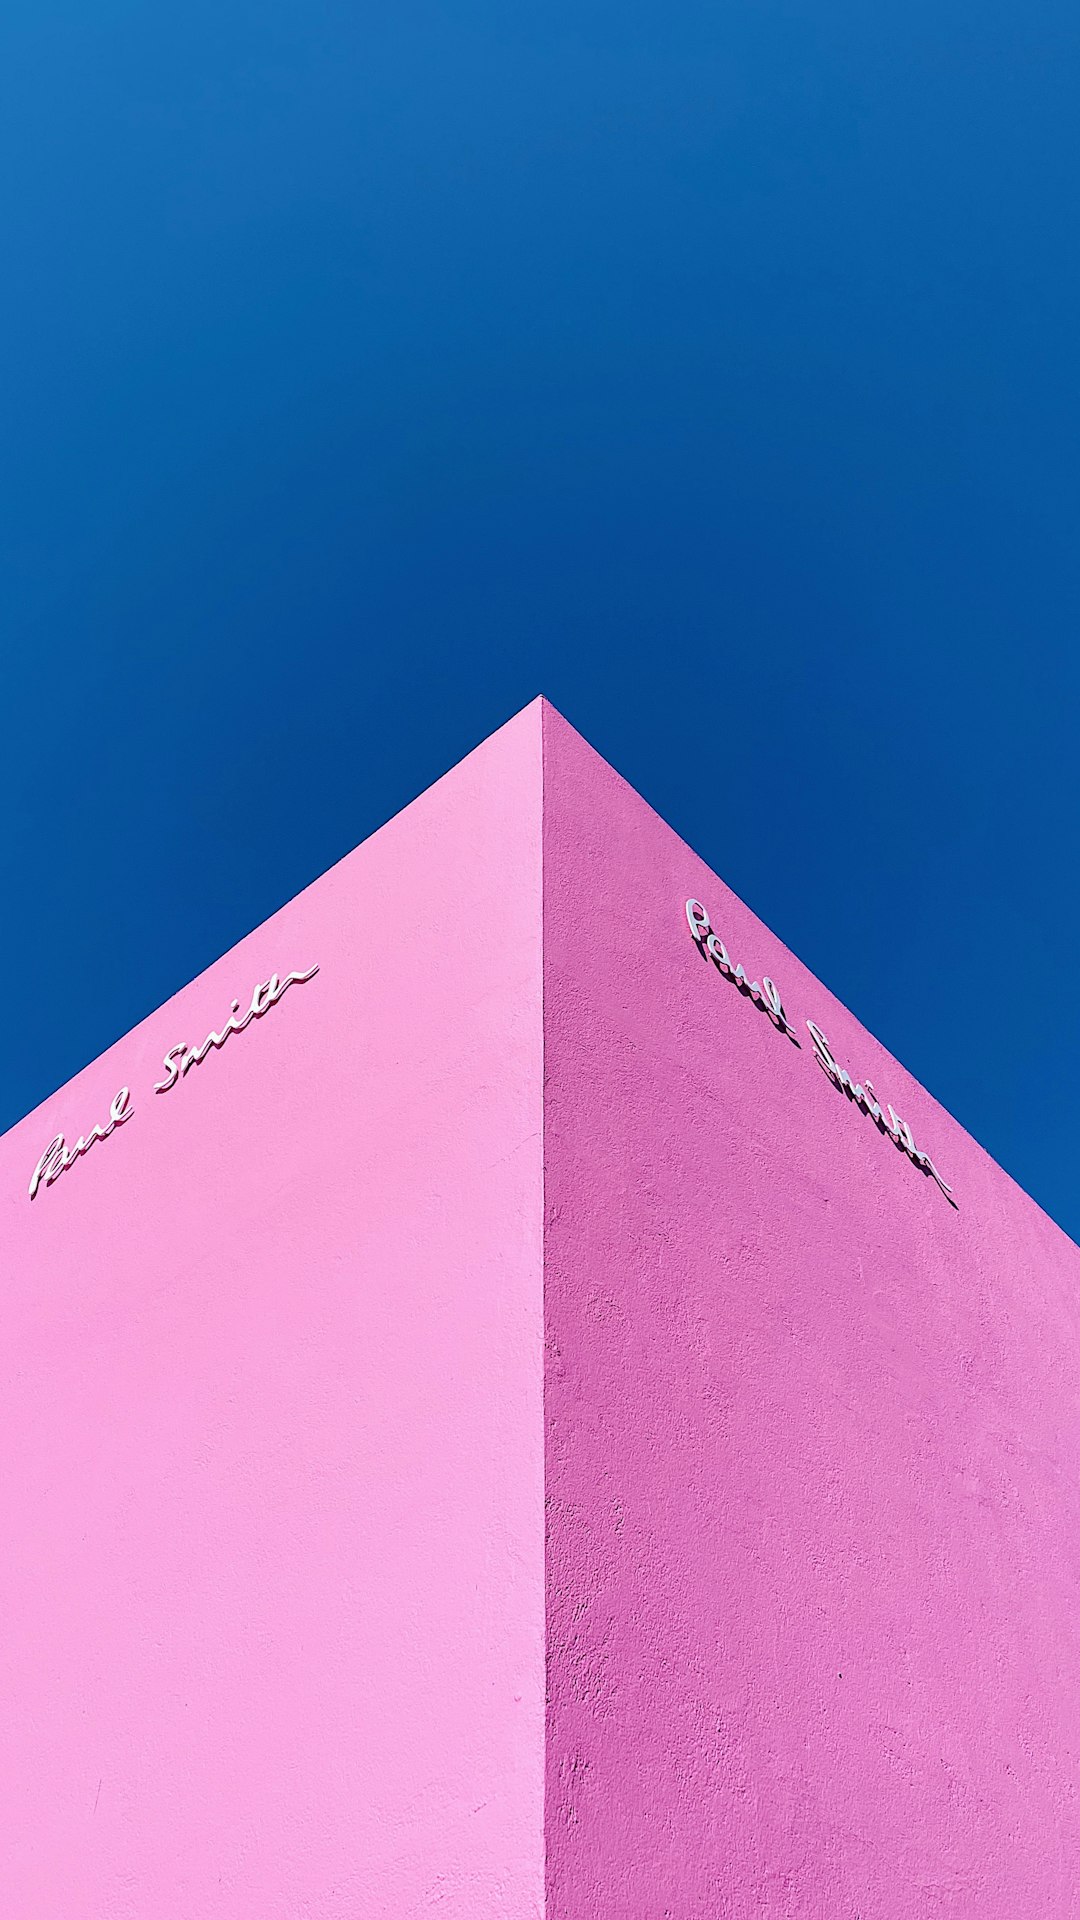 pink and green love you card photo – Free Architecture Image on Unsplash